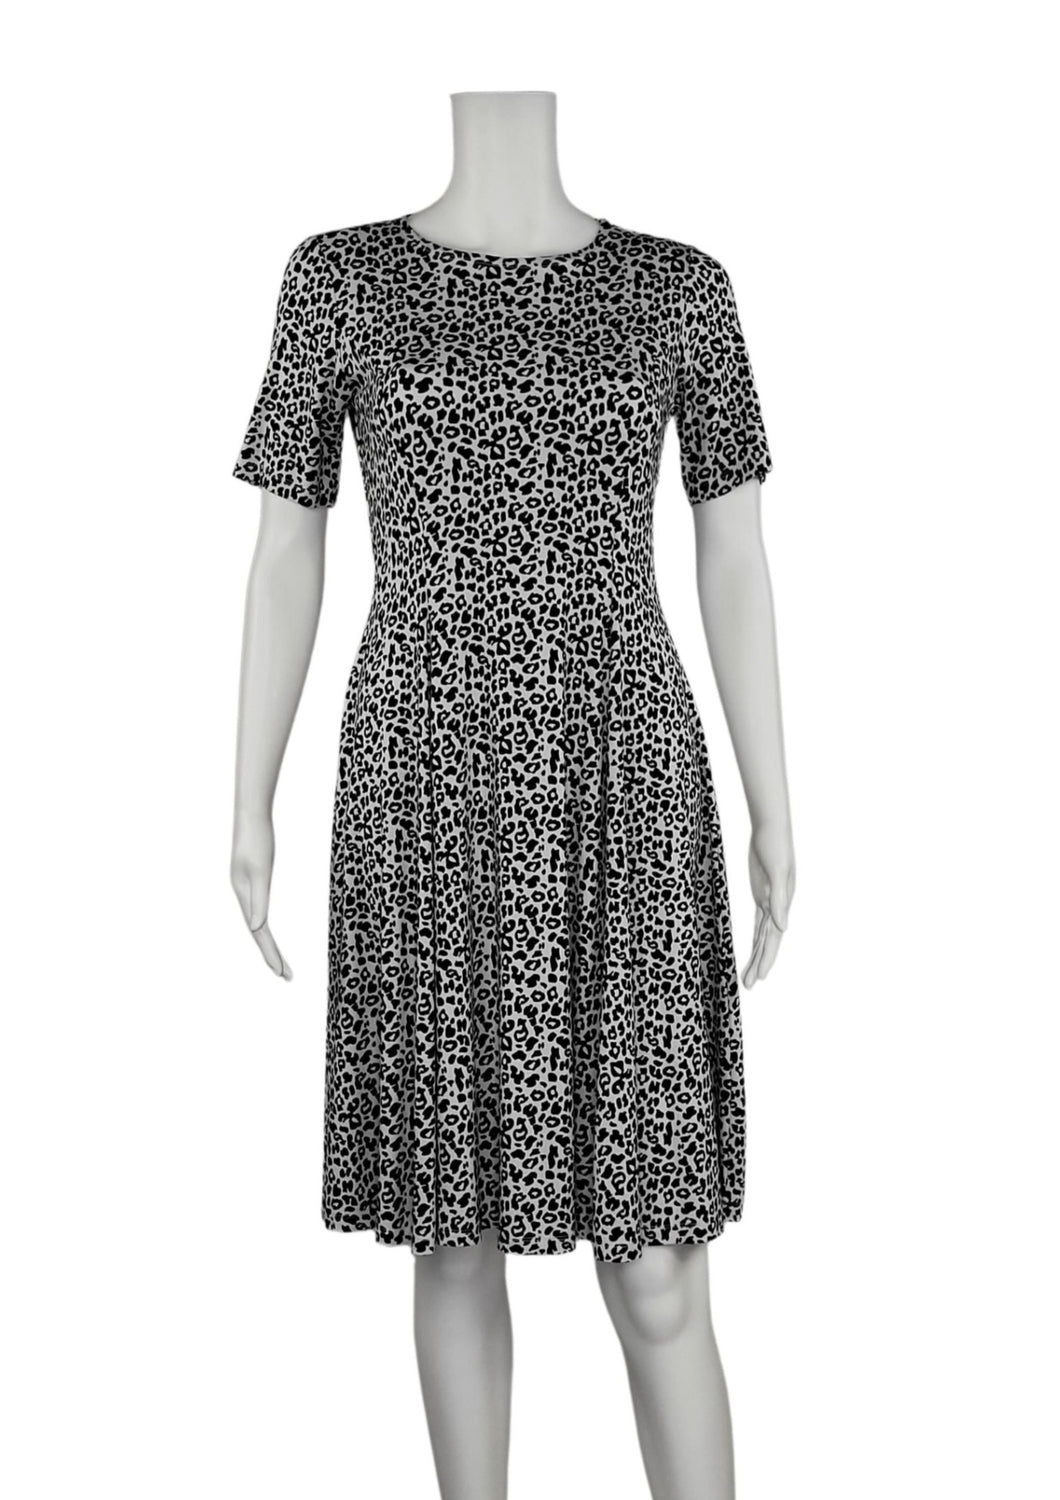 The Leopard Print Bamboo Twirl Dress is a simple and elegant style with a luxurious look and feel. Similar to the Swing Dress, it is a compliment to all body shapes with its princess line fit, round neck, 3/4 sleeve and 3